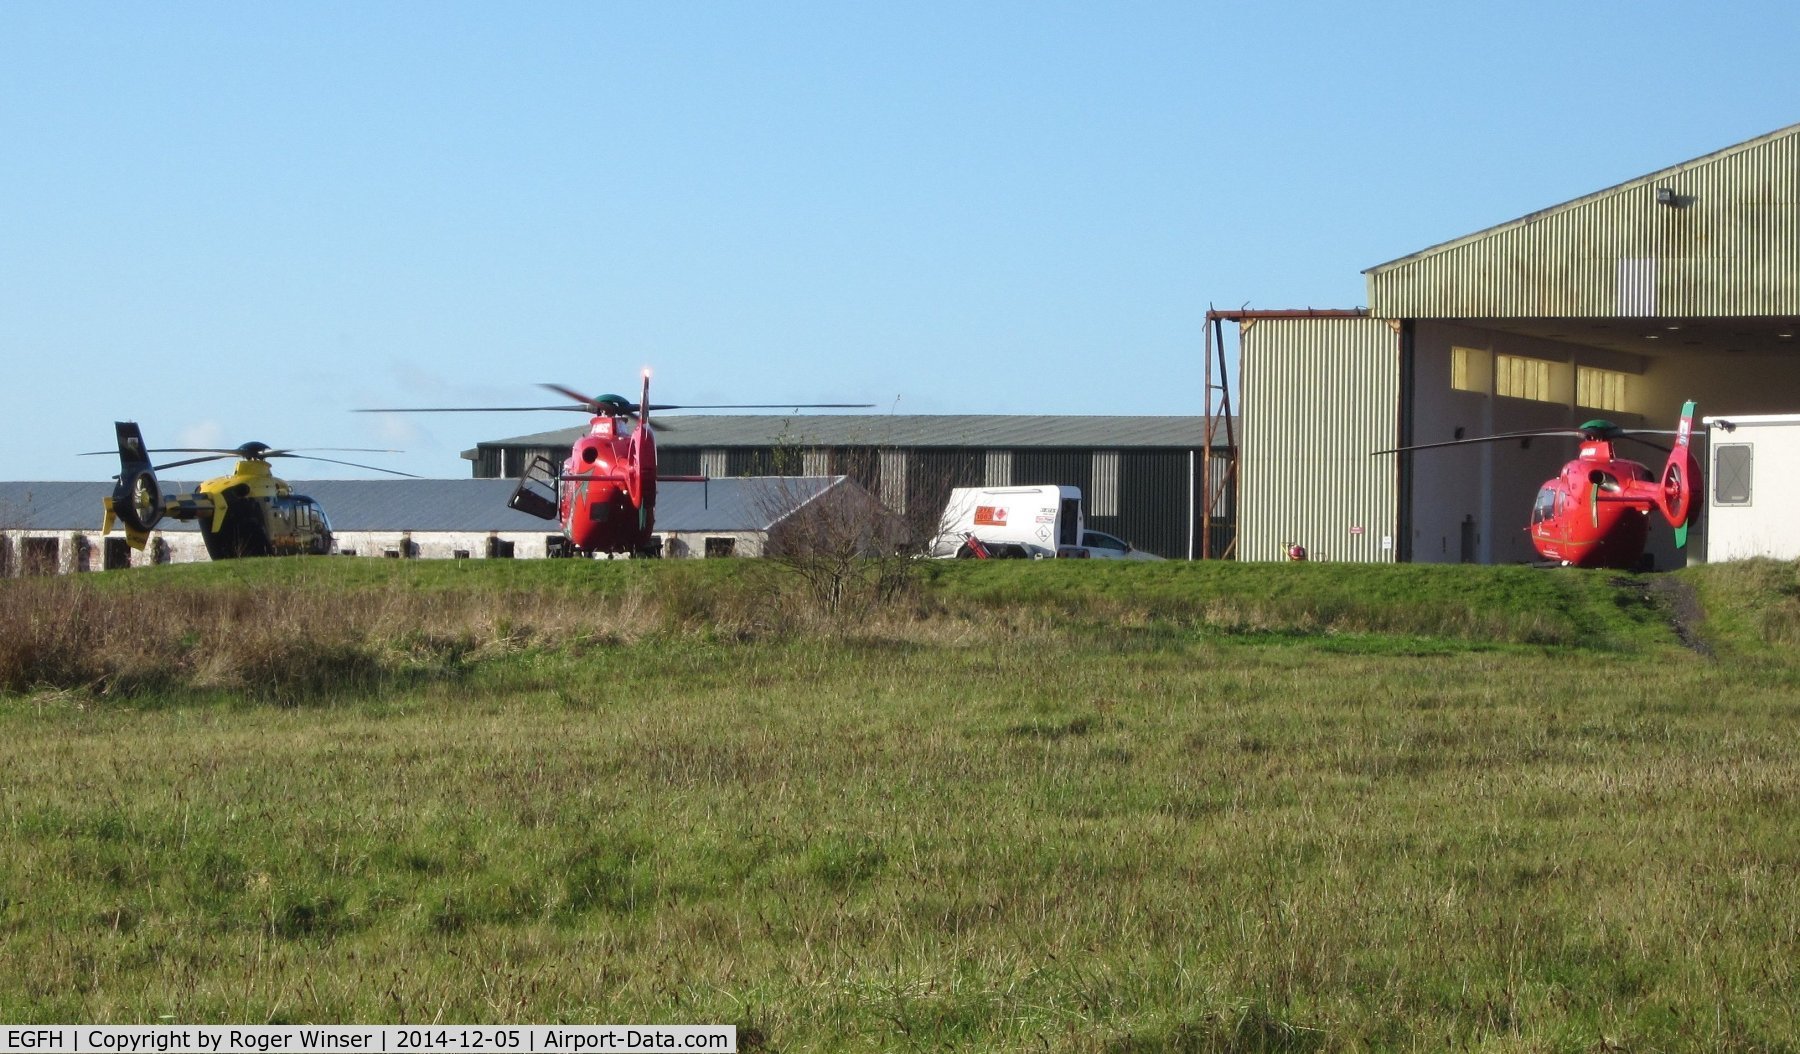 Swansea Airport, Swansea, Wales United Kingdom (EGFH) - A police and two air ambulance emergency services helicopters on the apron by the Wales Air Ambulance base at Hangar 1.